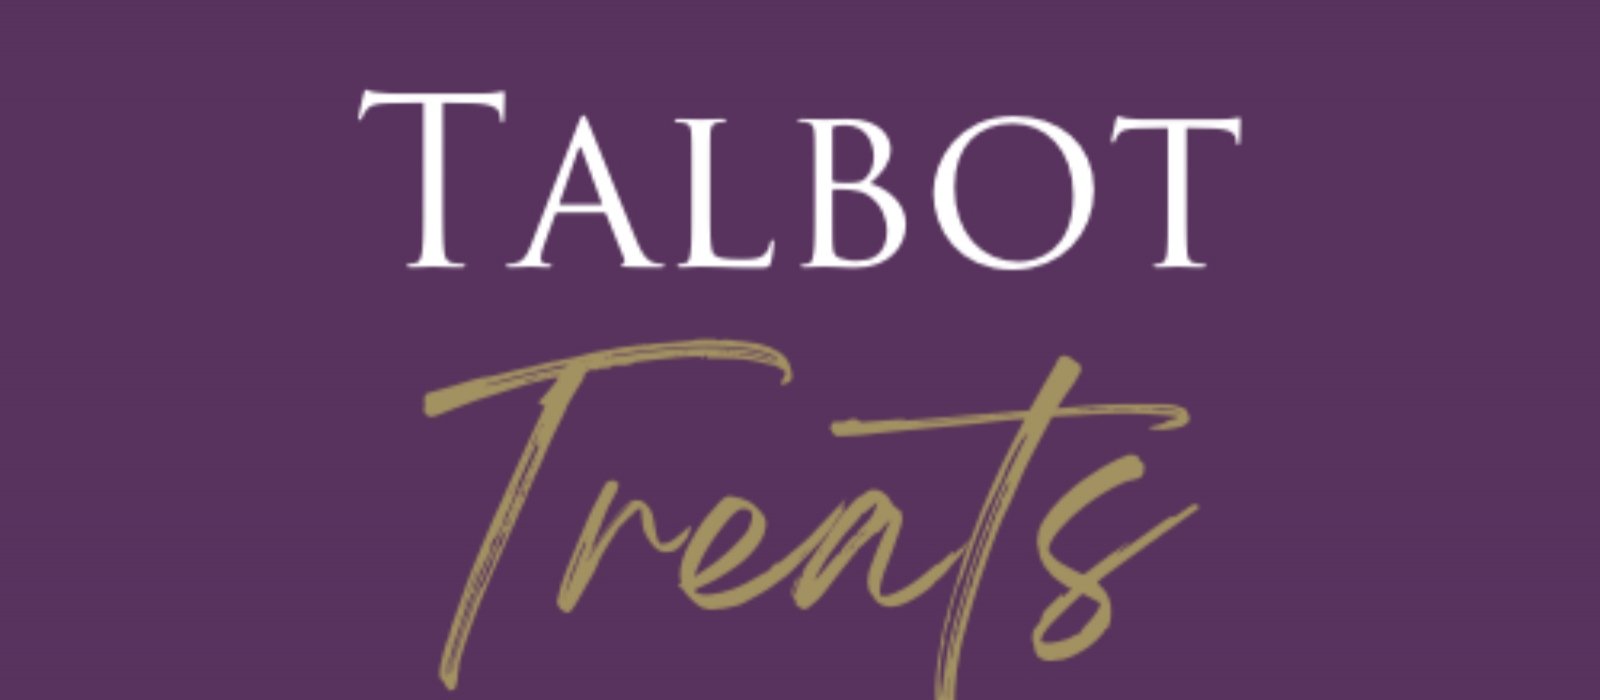 Offers   talbot treats www.talbotcollection.ie_v2